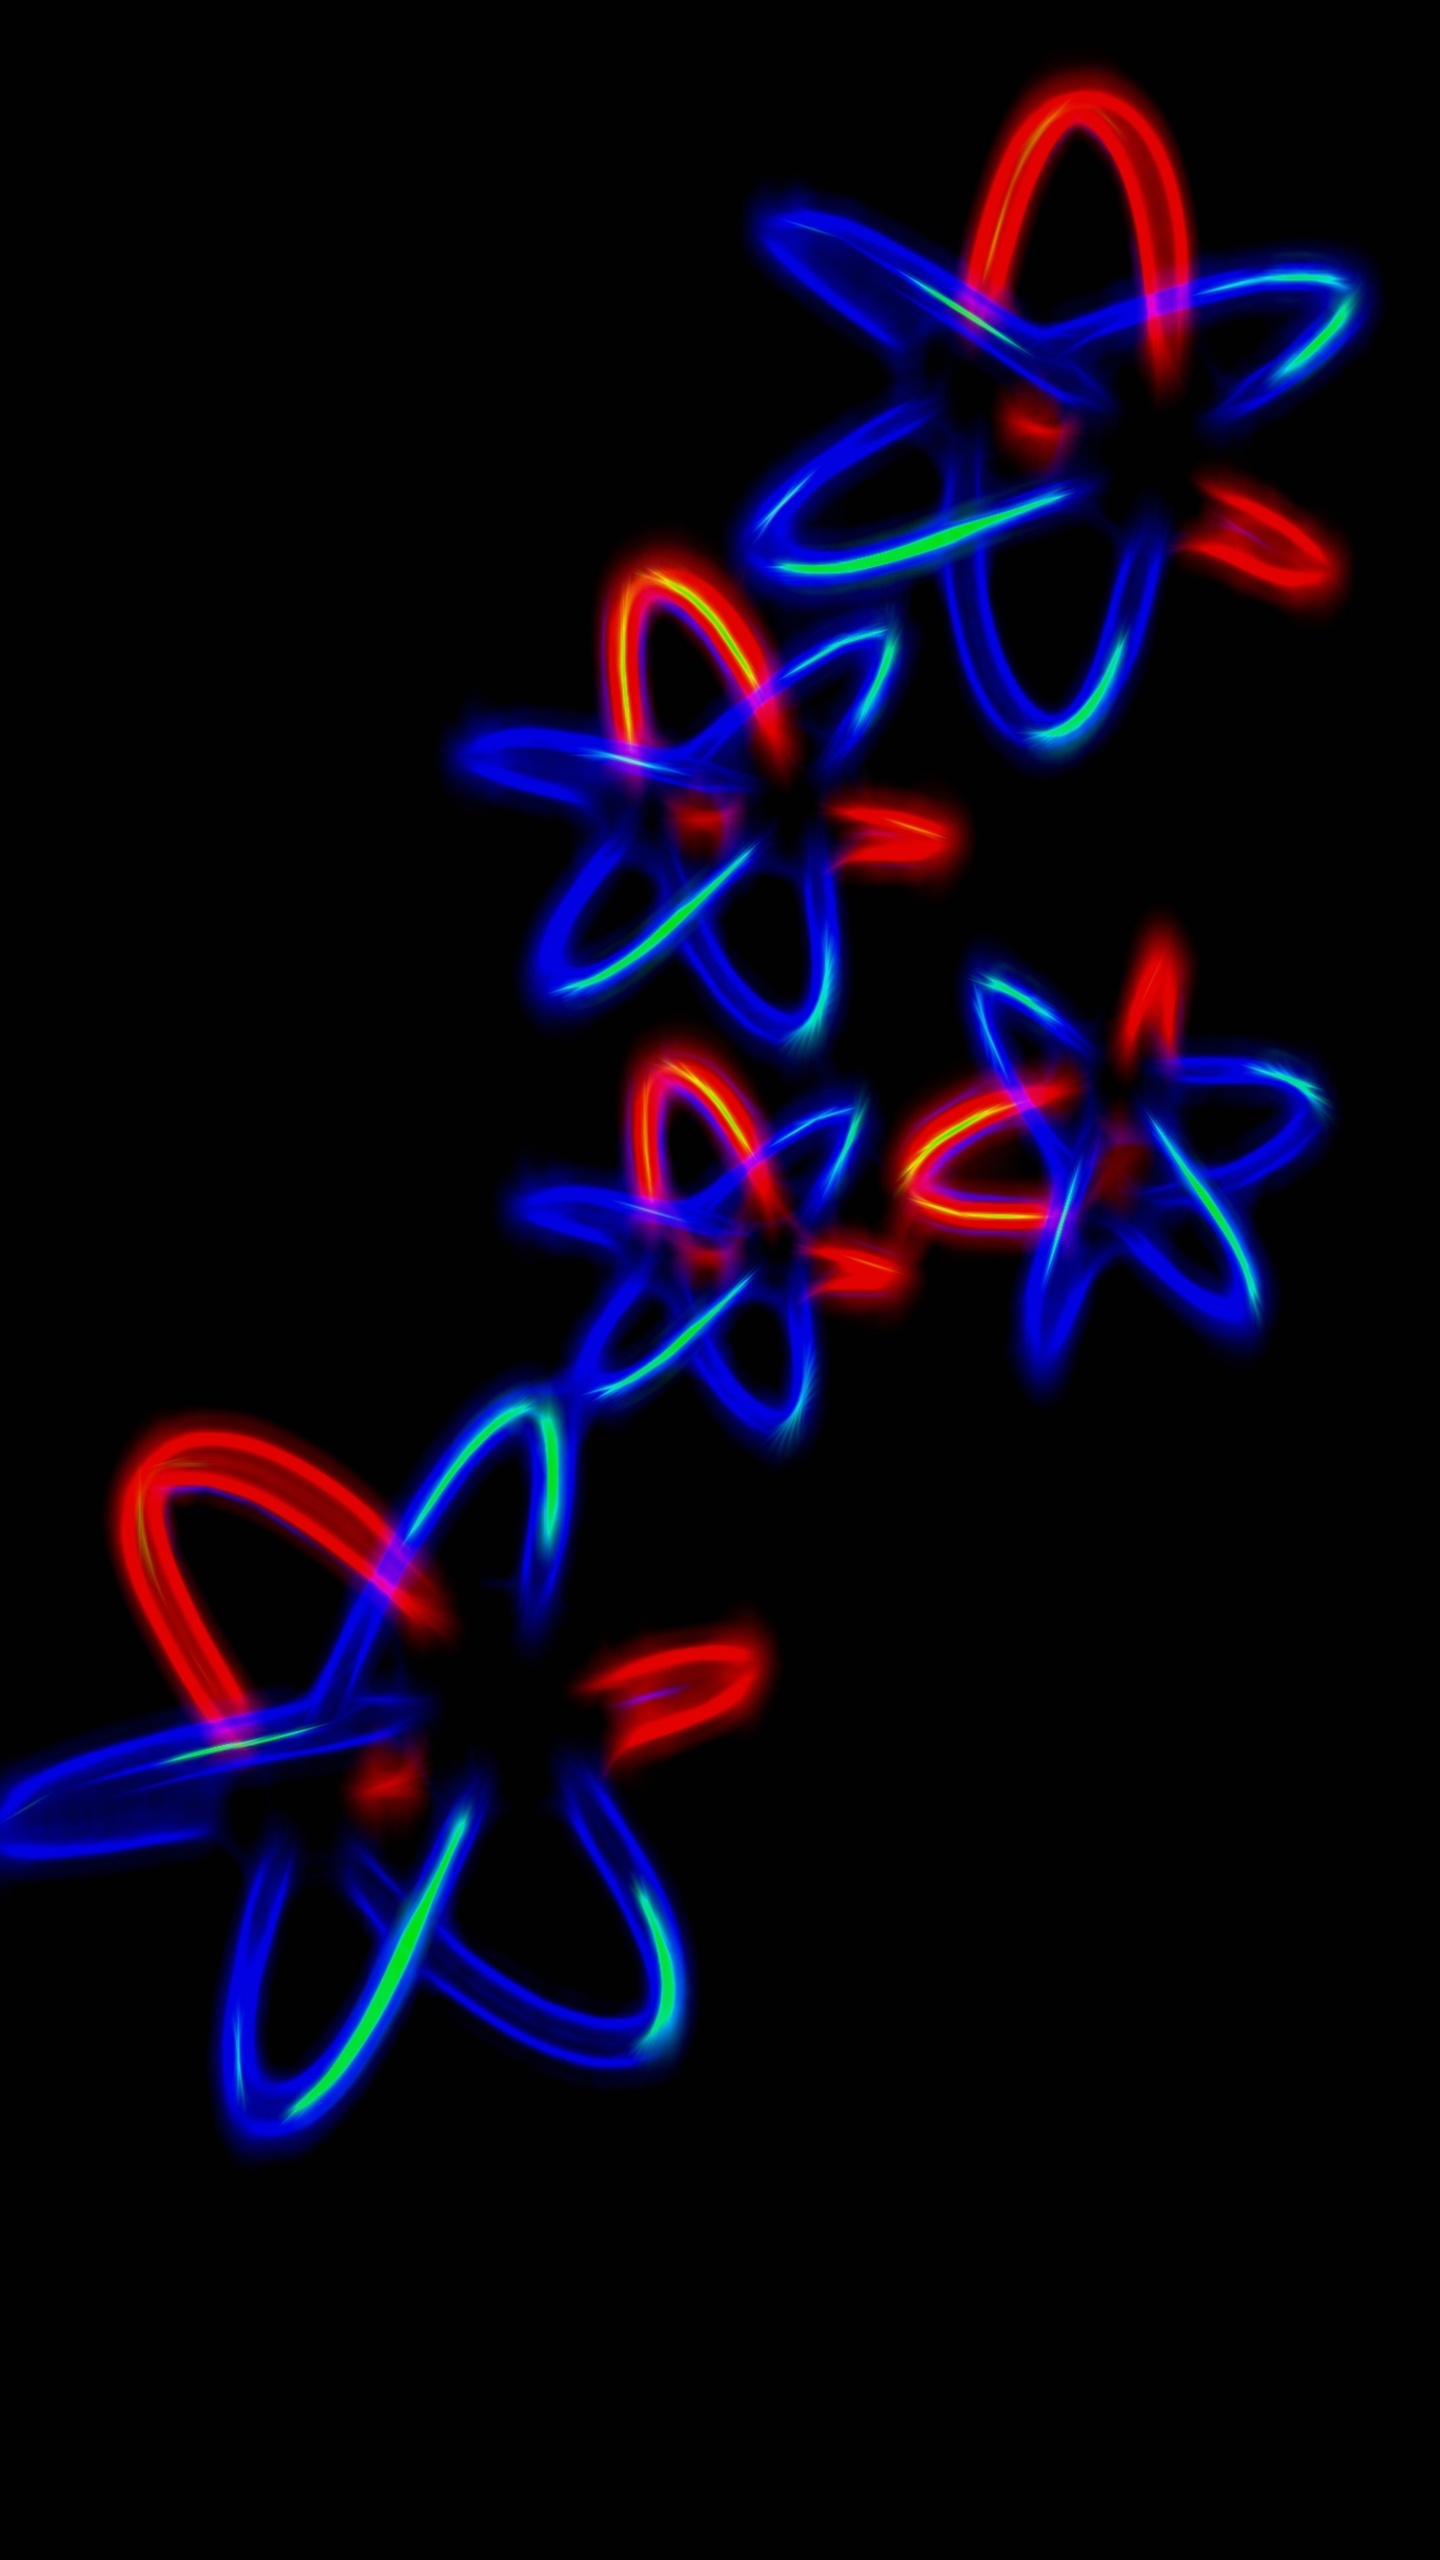 Red Blue and Yellow Abstract Illustration. Wallpaper in 1440x2560 Resolution